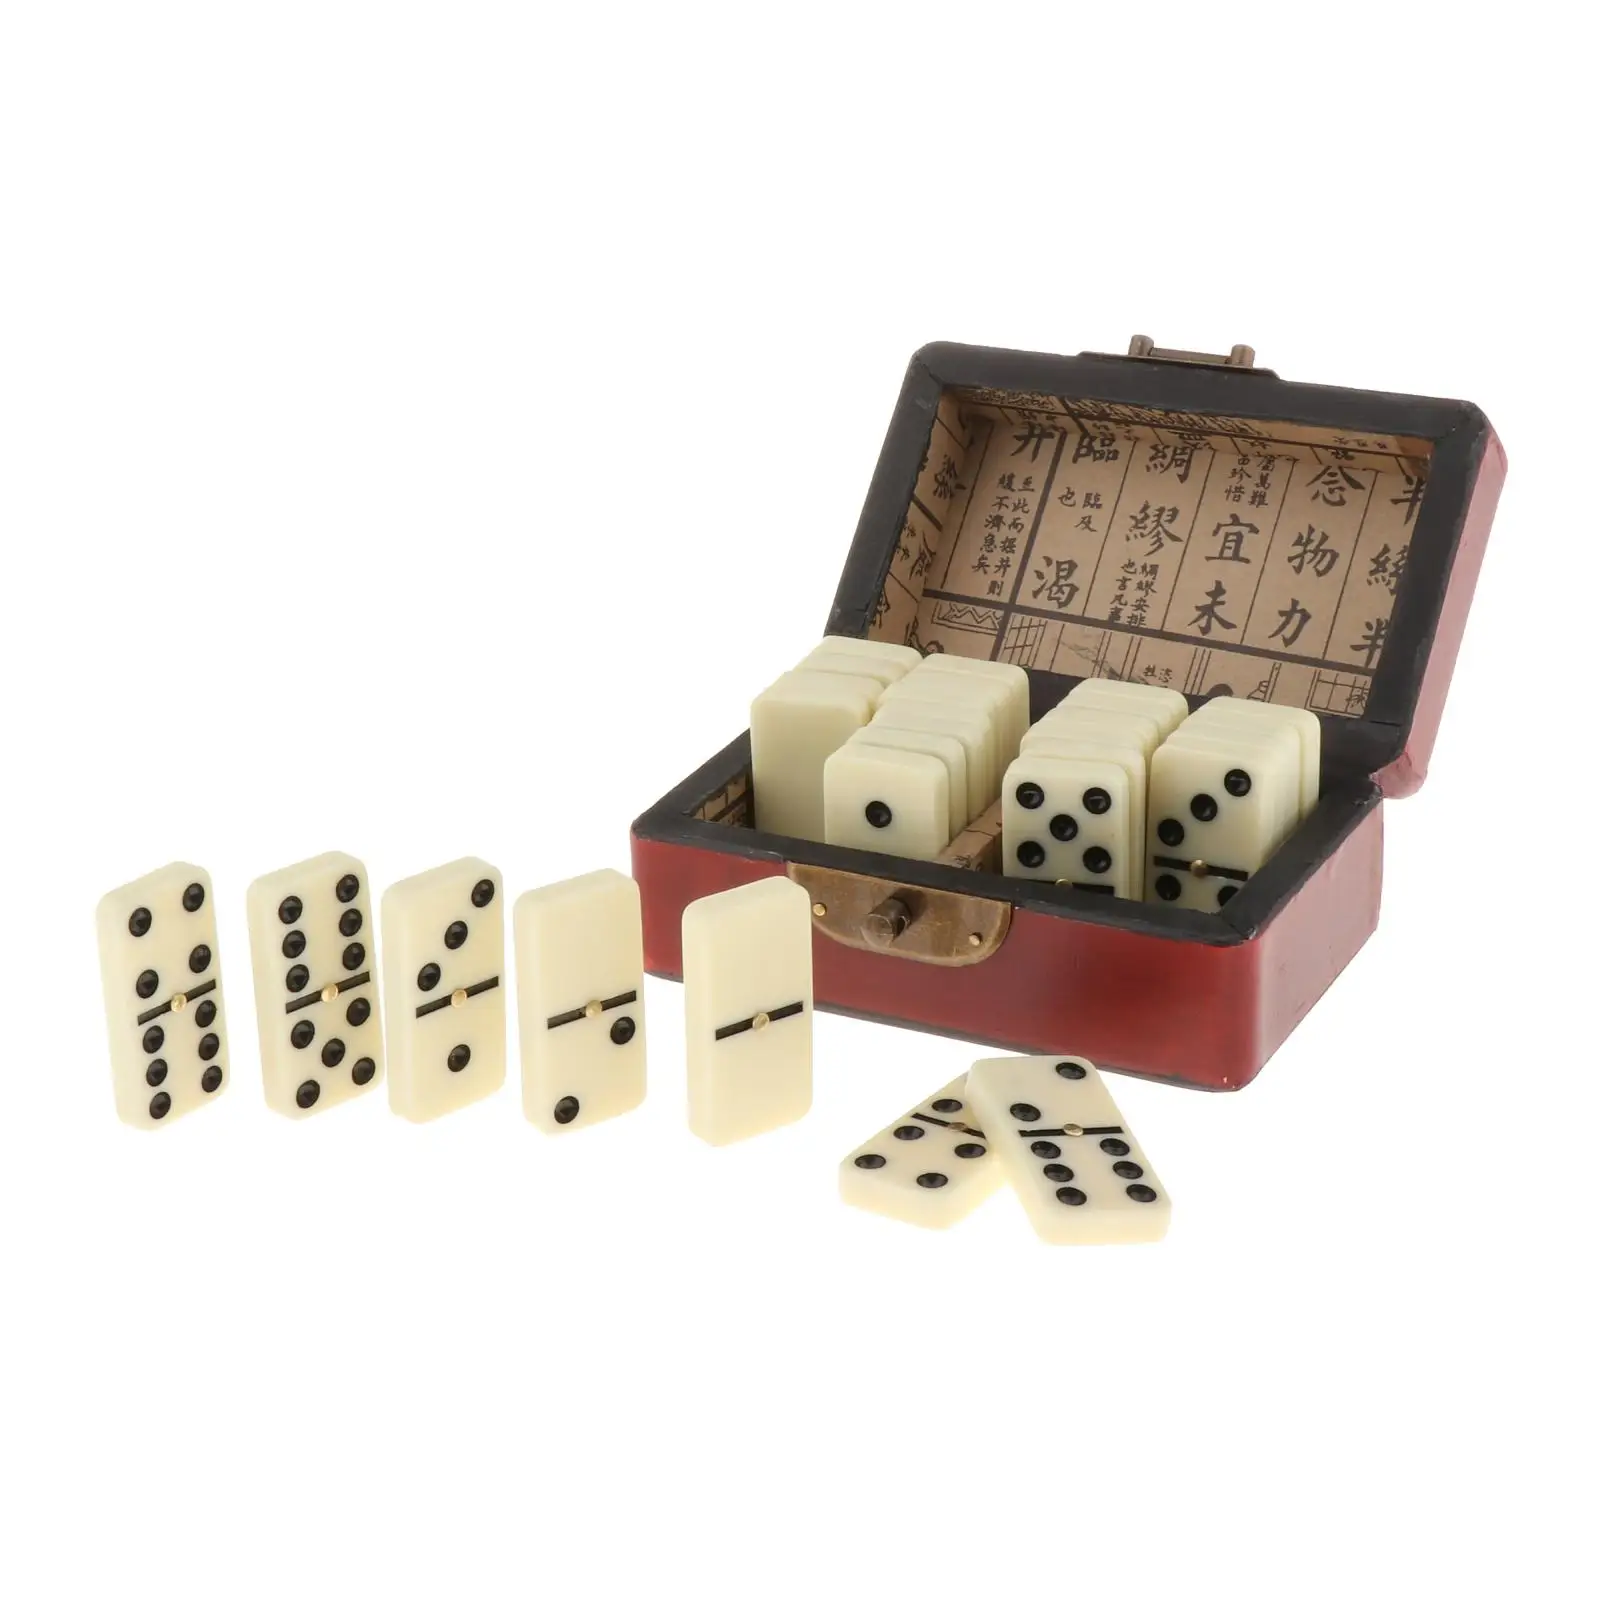 Club Size Ivory Tiles WE Games Double Six Dominoes with Spinners